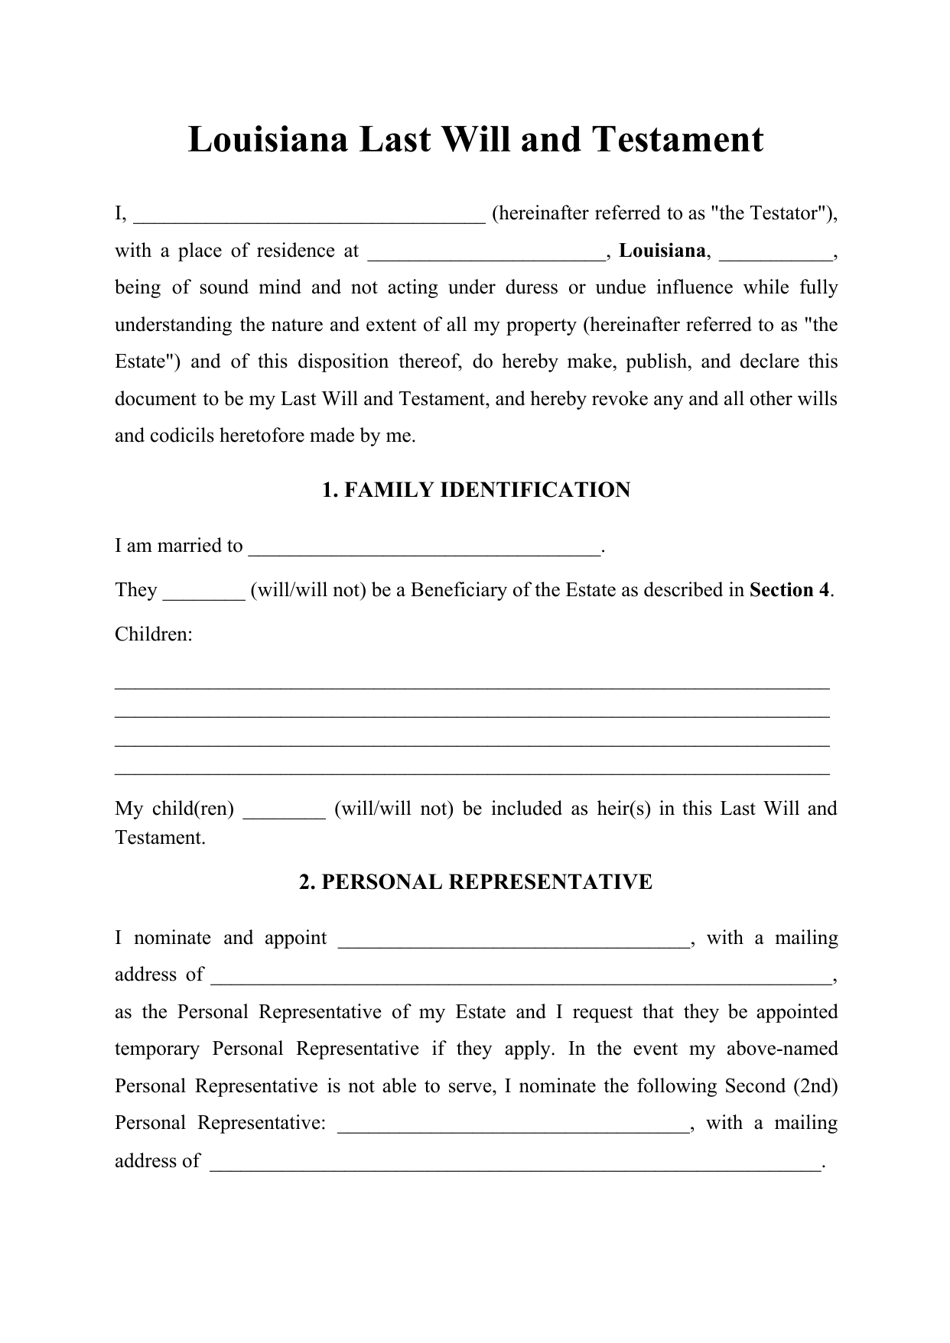 Louisiana Last Will and Testament Template Download Printable PDF